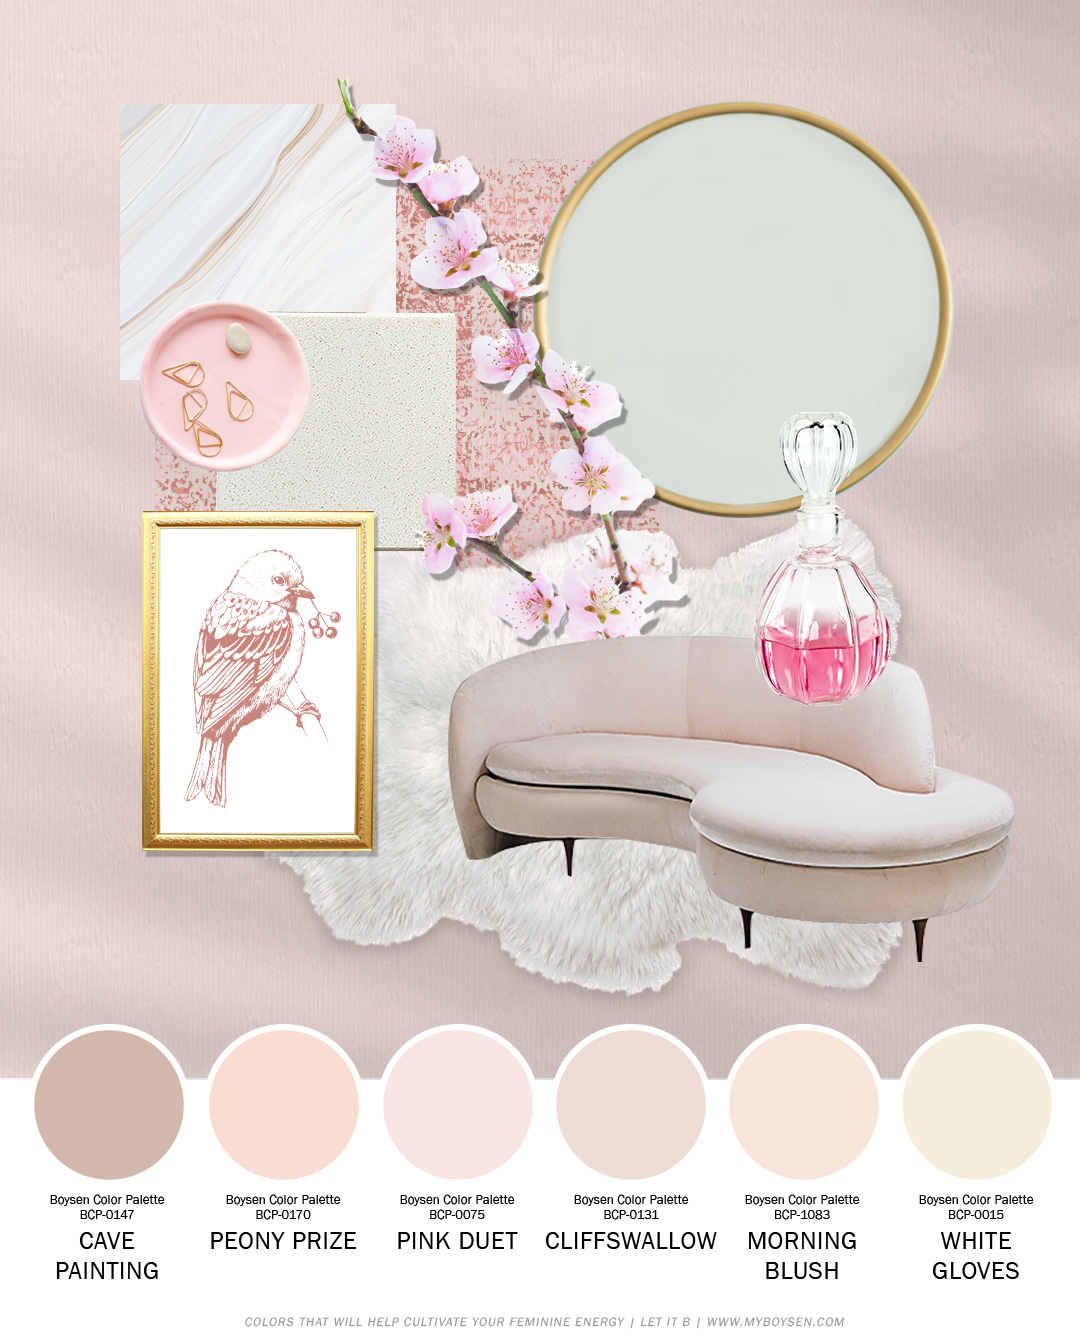 Colors That Will Help Cultivate Your Feminine Energy | MyBoysen